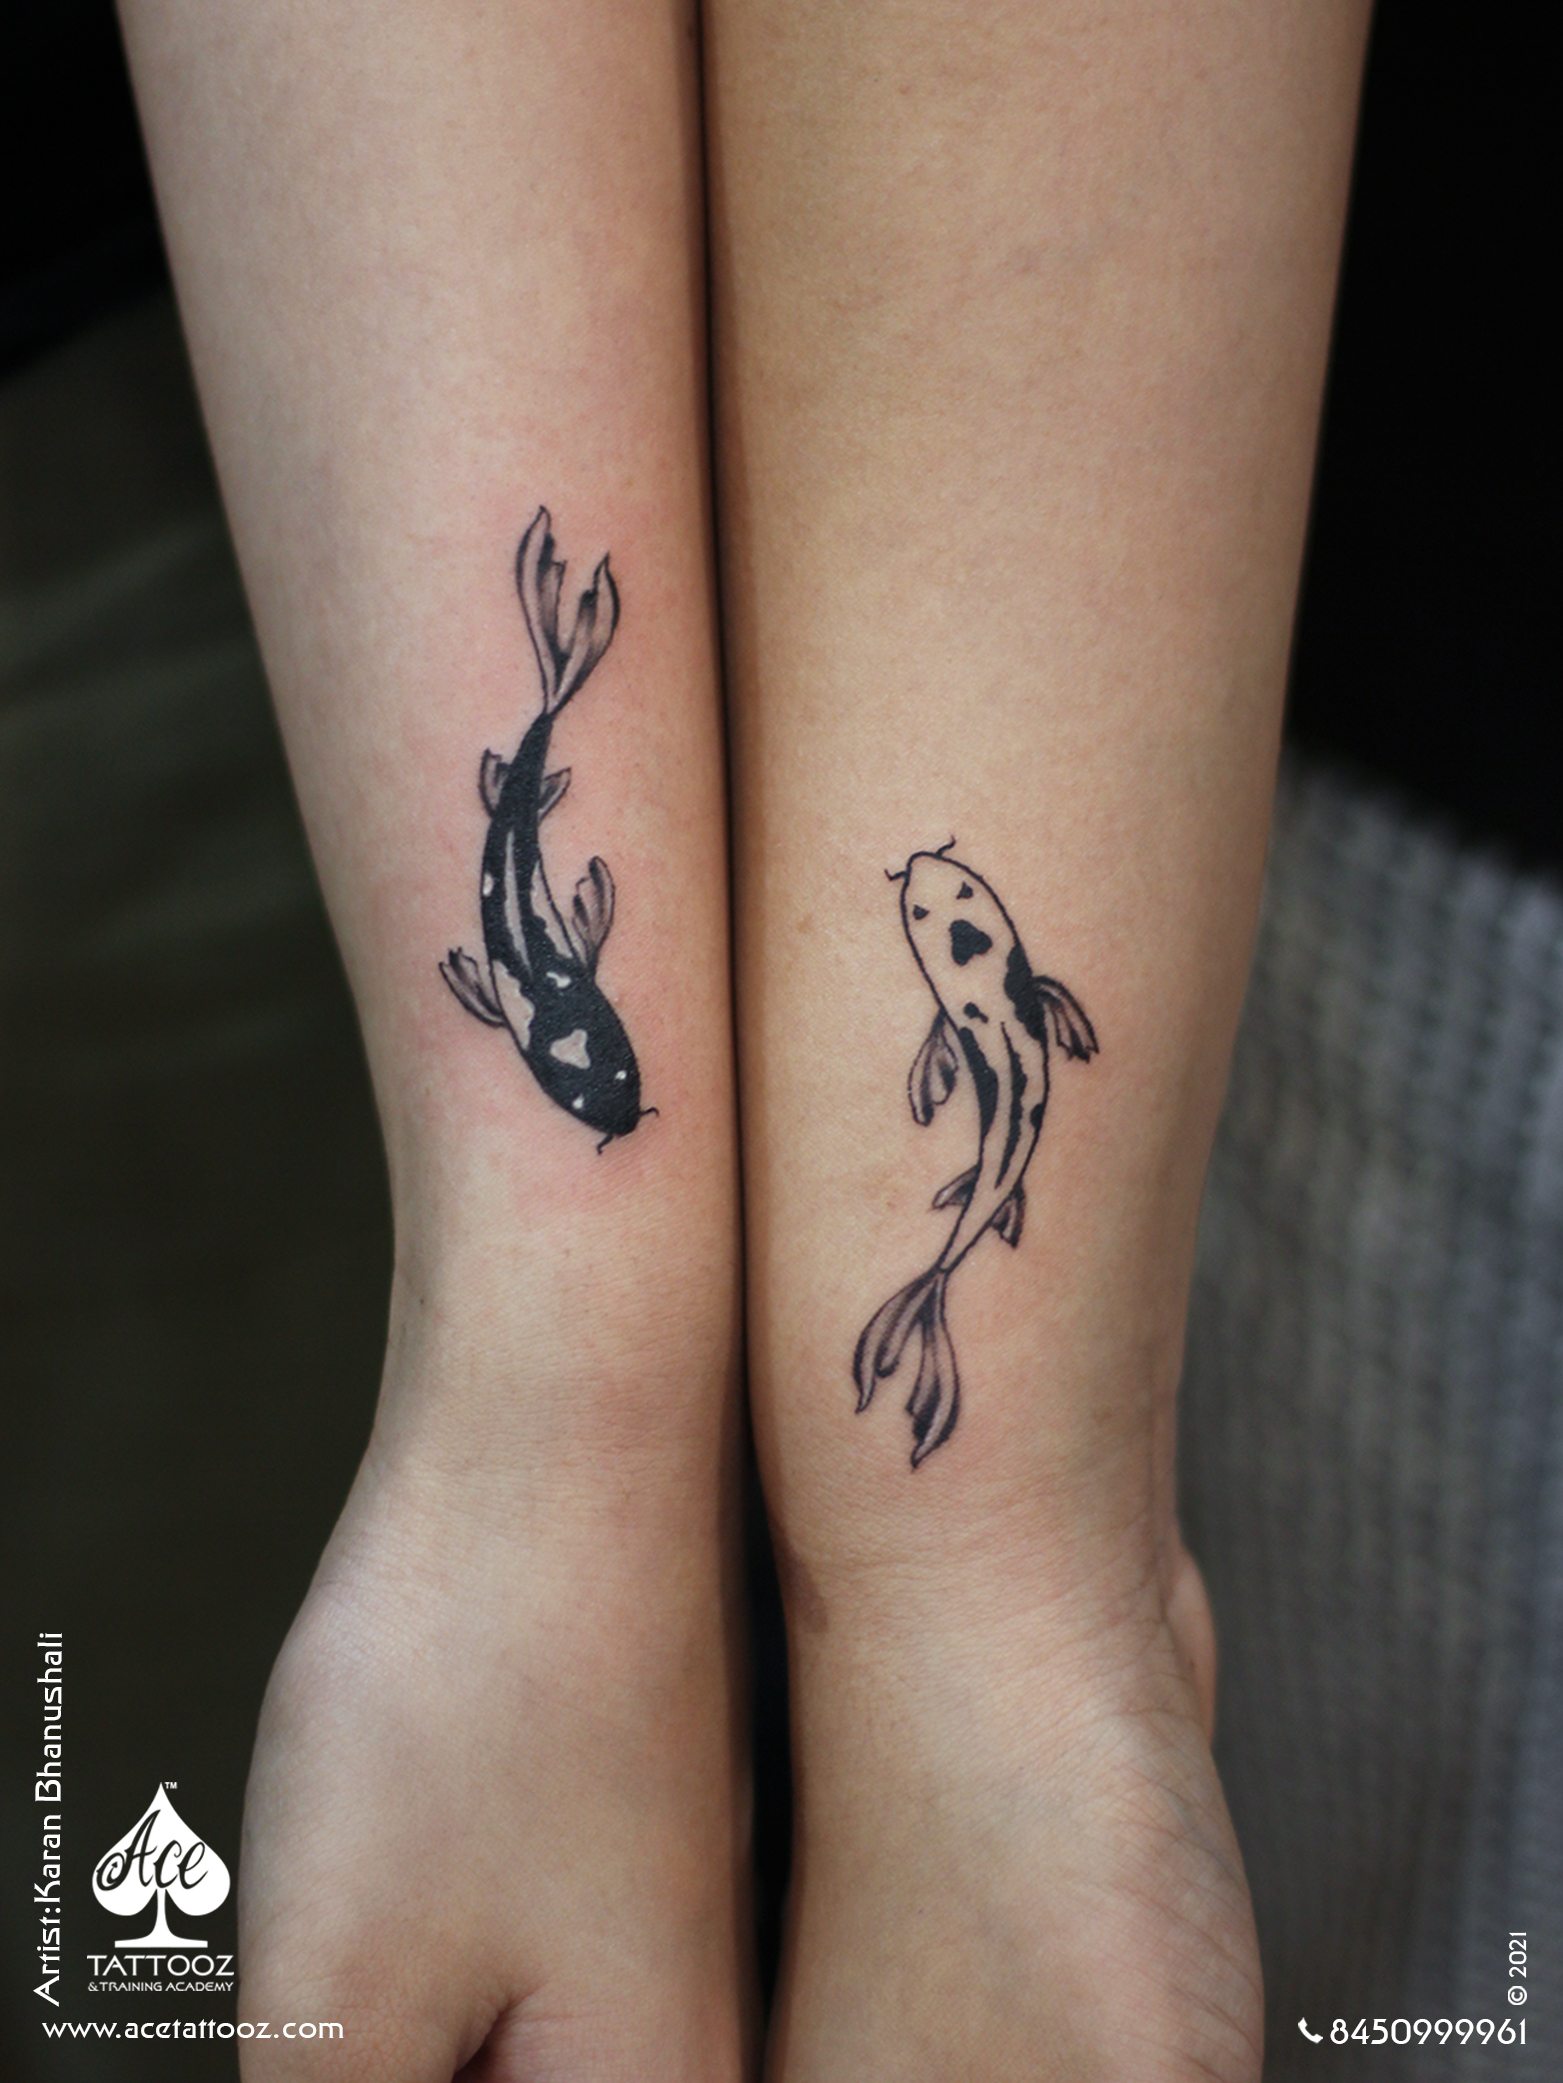 The meaningful symbolism behind a Koi fish tattoo | Best Tattoo & Piercing  Shop & Tattoo Artists in Denver